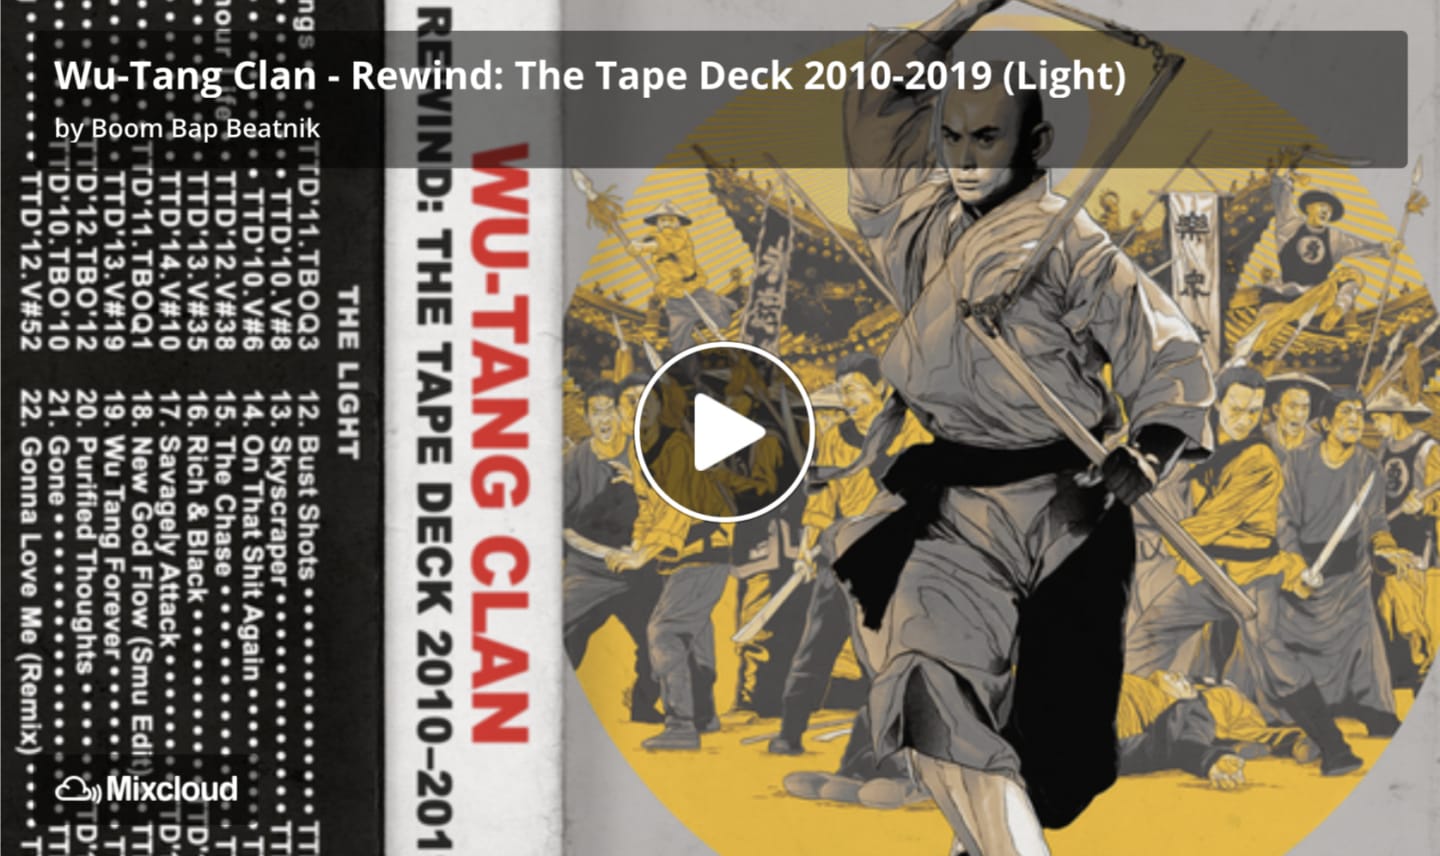 Mix: Wu-Tang Clan - Rewind: The Tape Deck 2010-2019